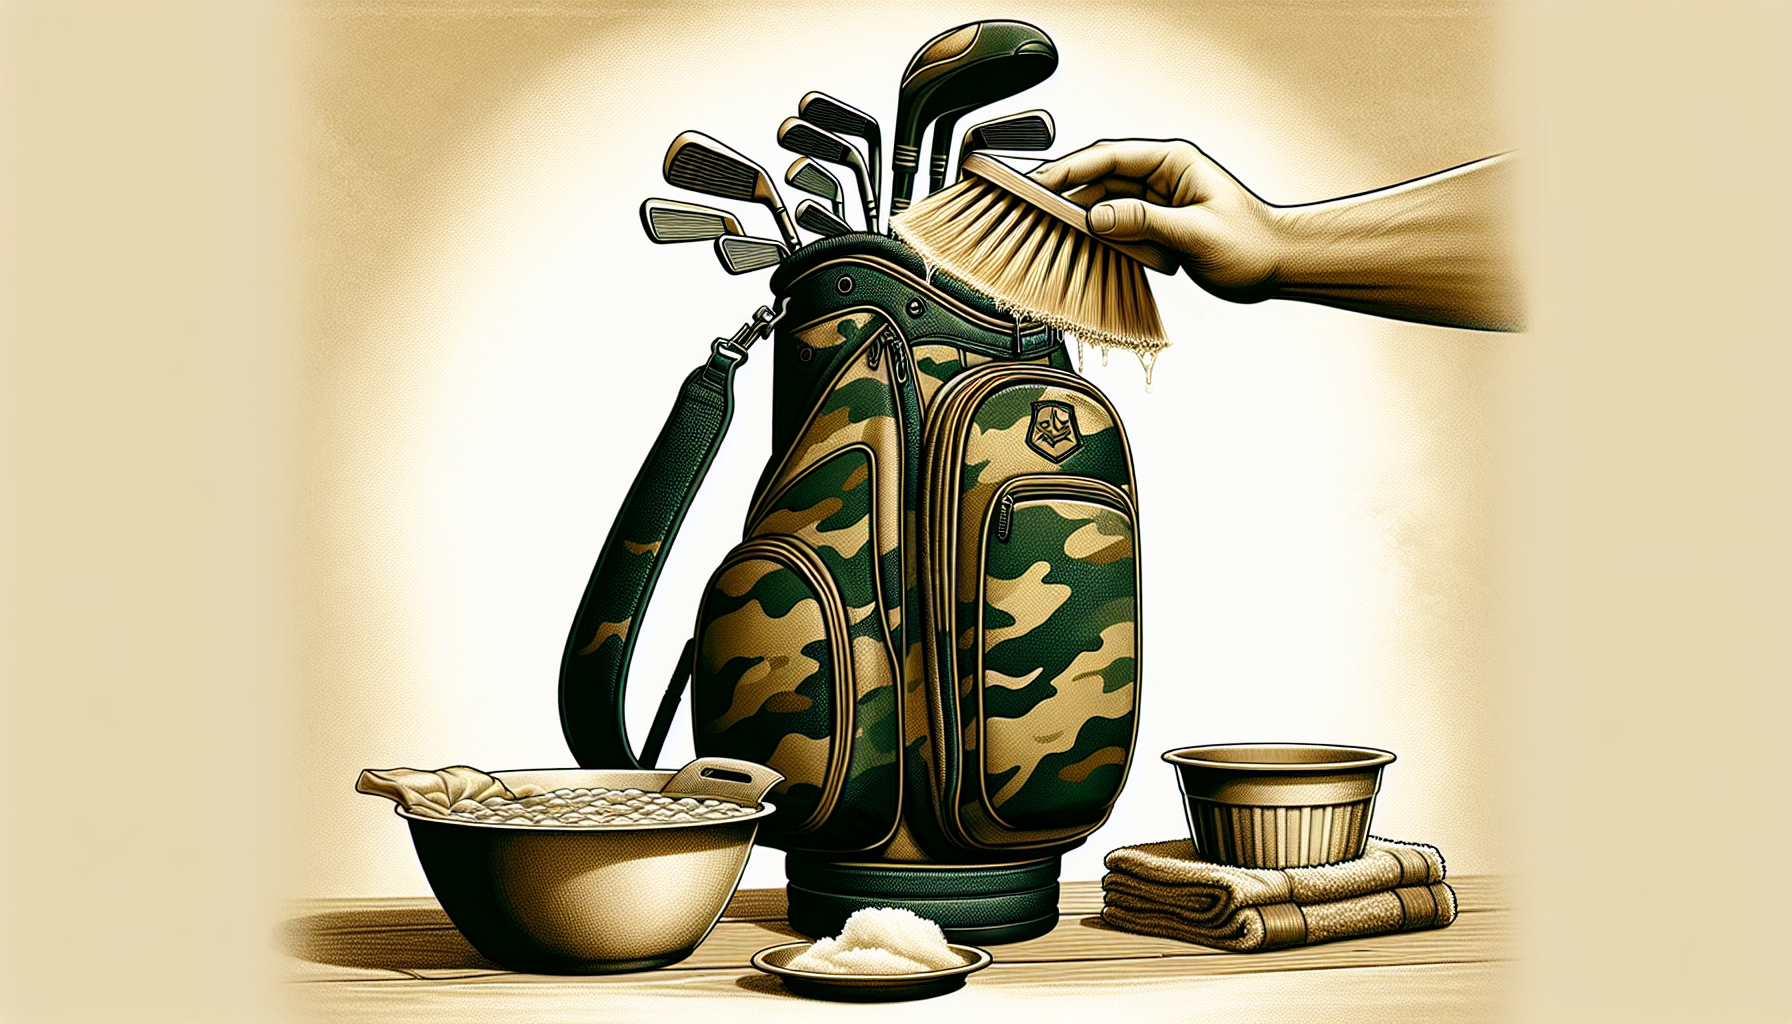 Artistic depiction of cleaning and maintaining a camo golf bag